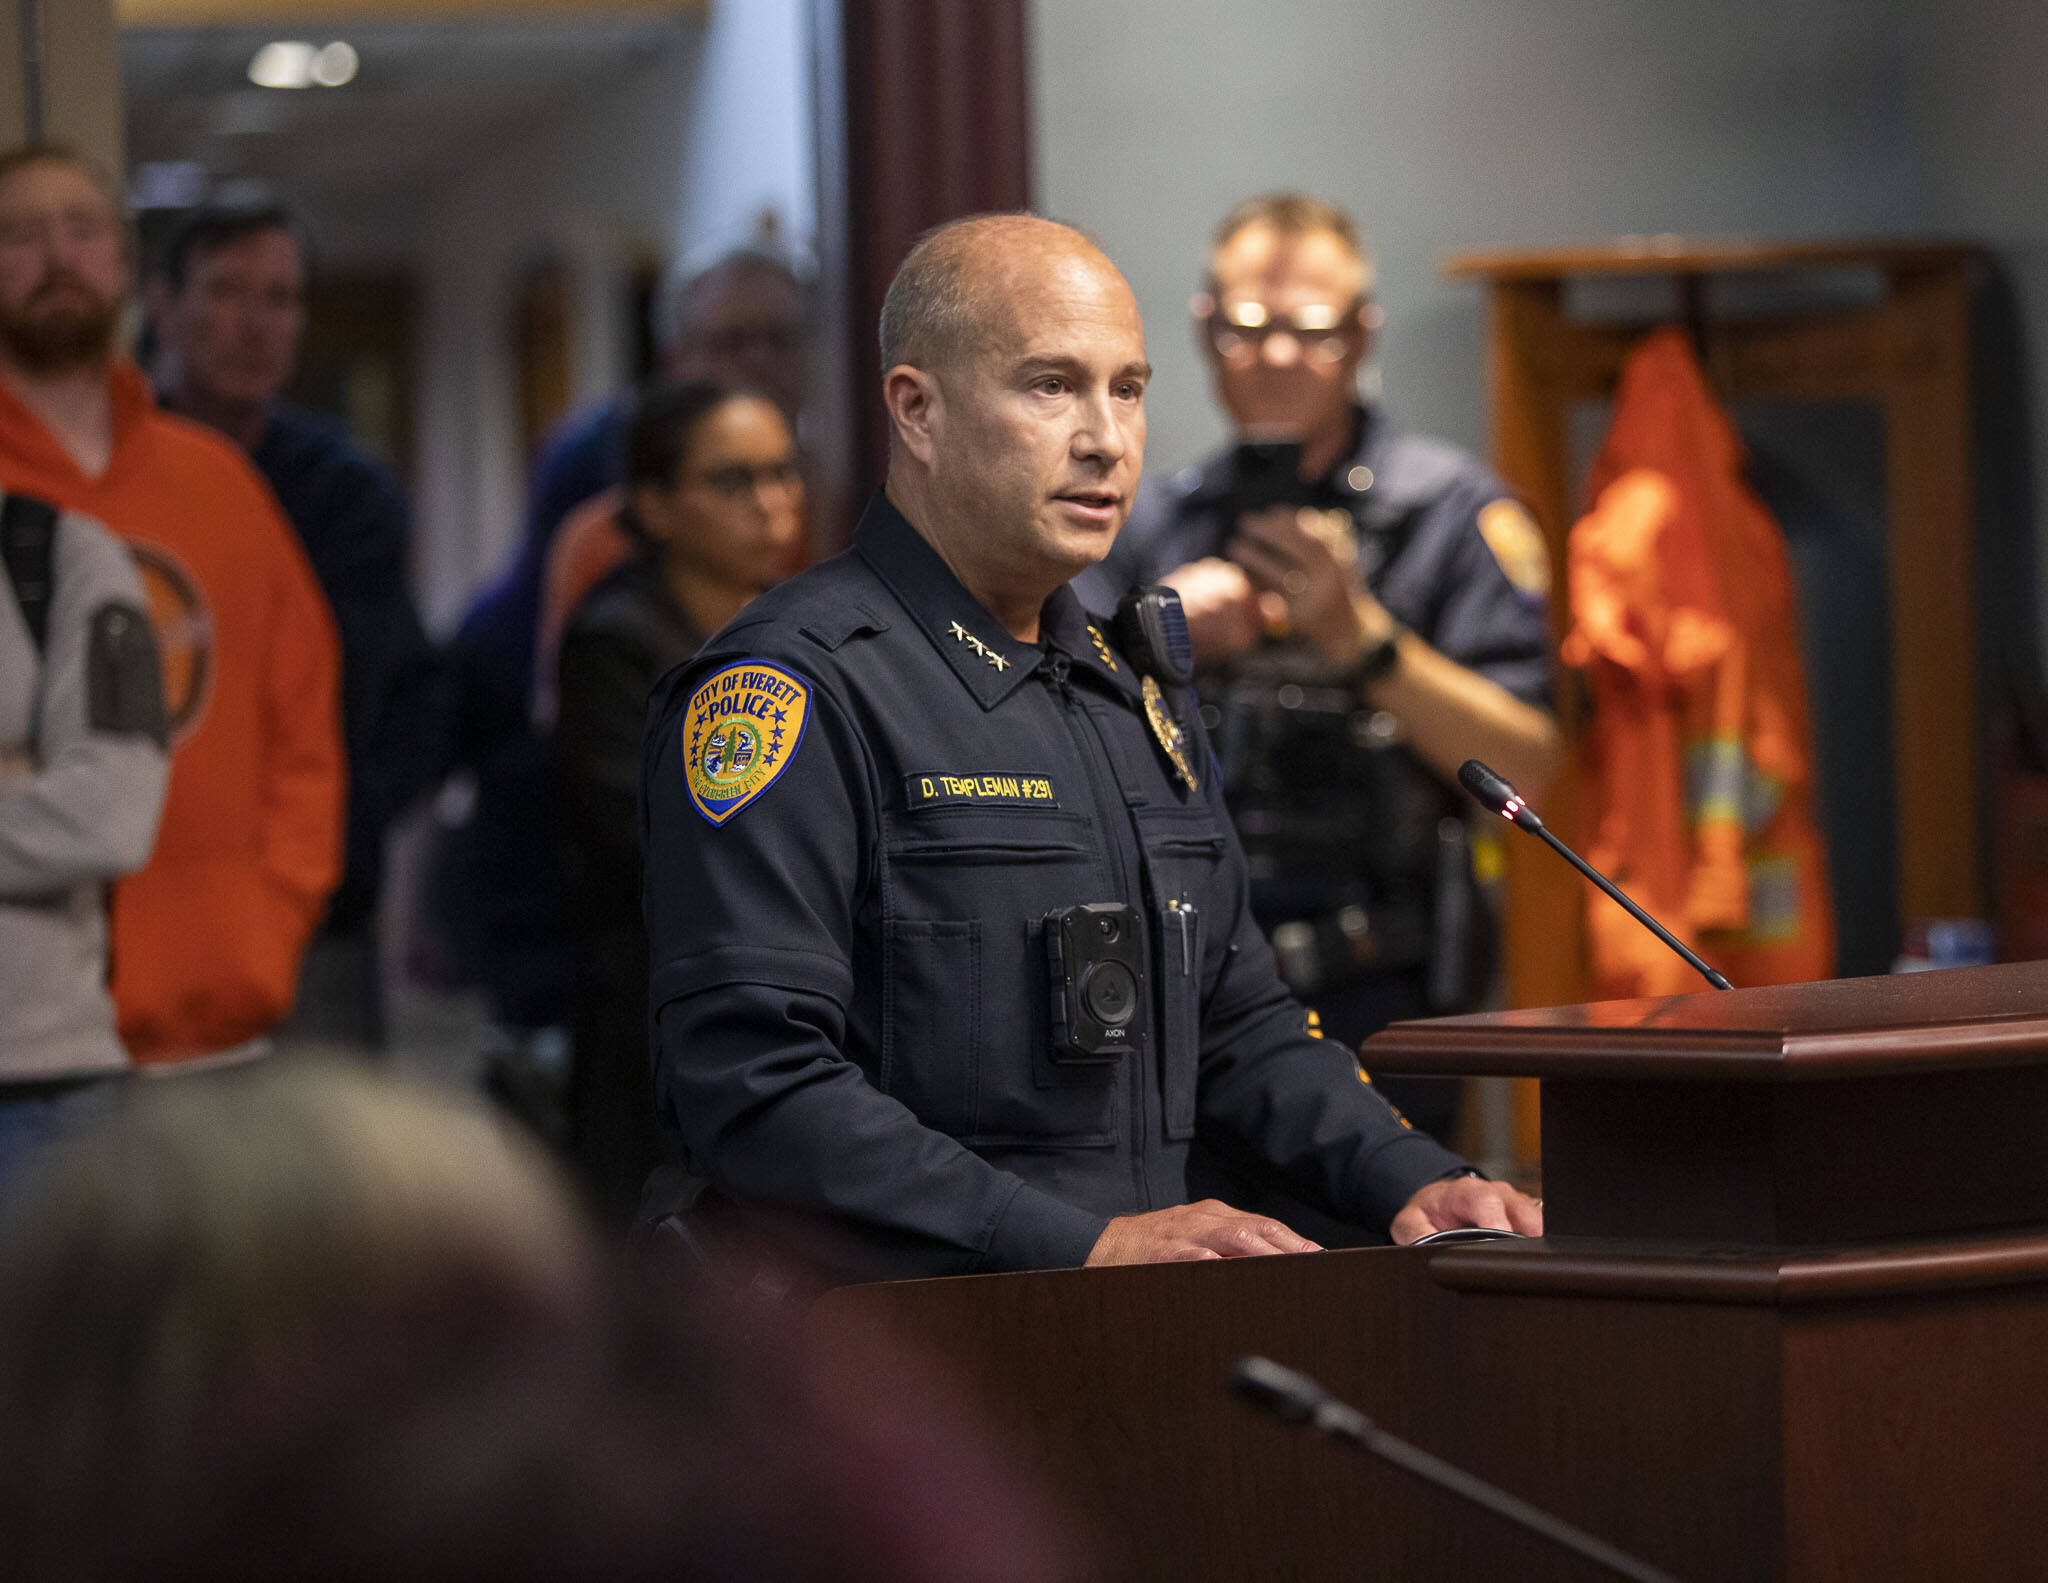 Everett Police Chief Dan Templeman announces his retirement after 31 years of service at the Everett City Council meeting on Wednesday, Sept. 27, 2023 in Everett, Washington. (Olivia Vanni / The Herald)